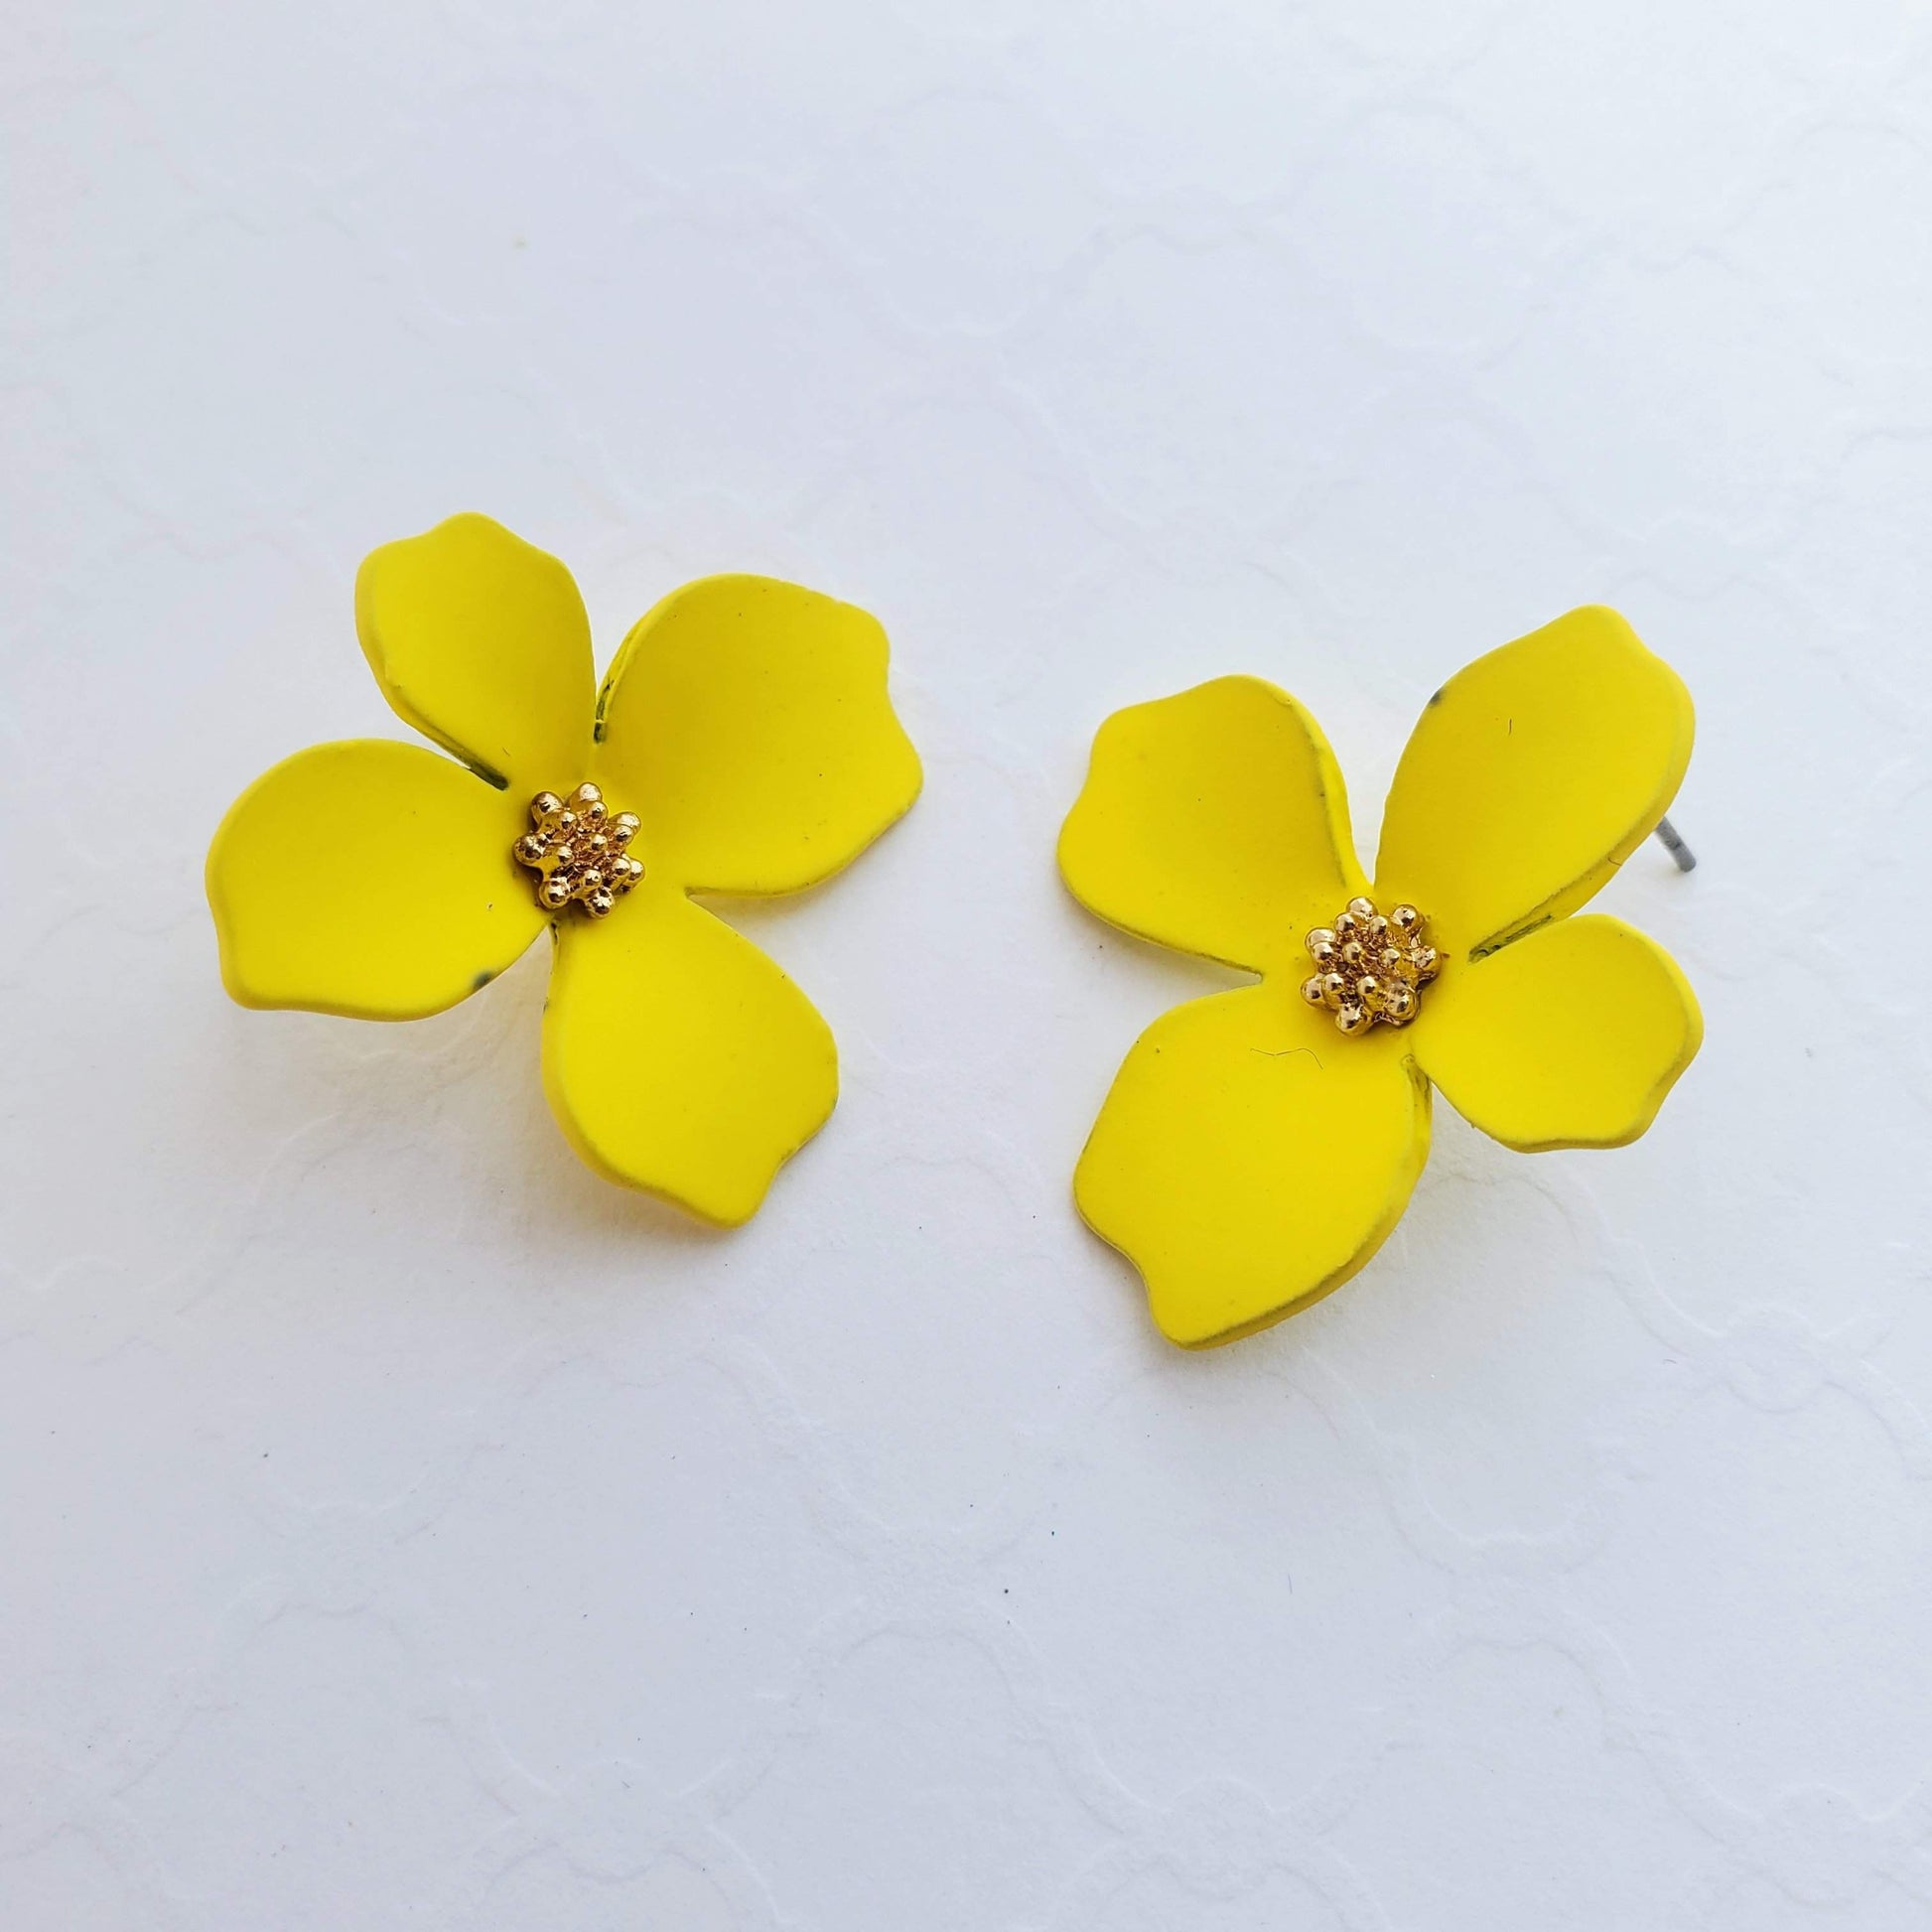 In Bloom Earring Collection-Trendi737 Jewelry Boutique-earrings,flower earrings,green,green earrings,green flower earring,green flower stud,In Bloom earrings,Summer earrings,summer jewelry,yellow,yellow earrings,yellow flower earring,yellow flower stud